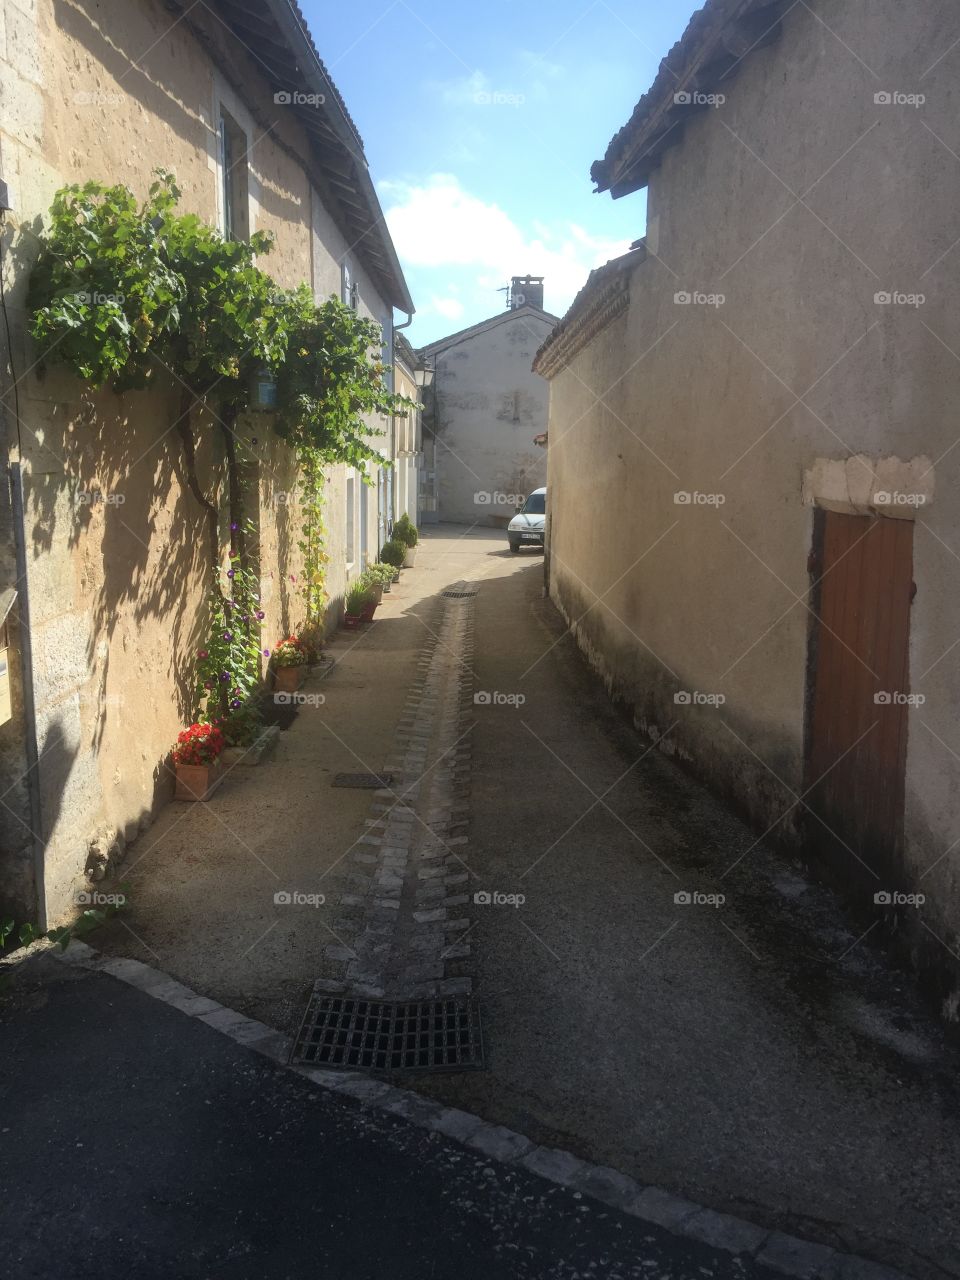 French side street